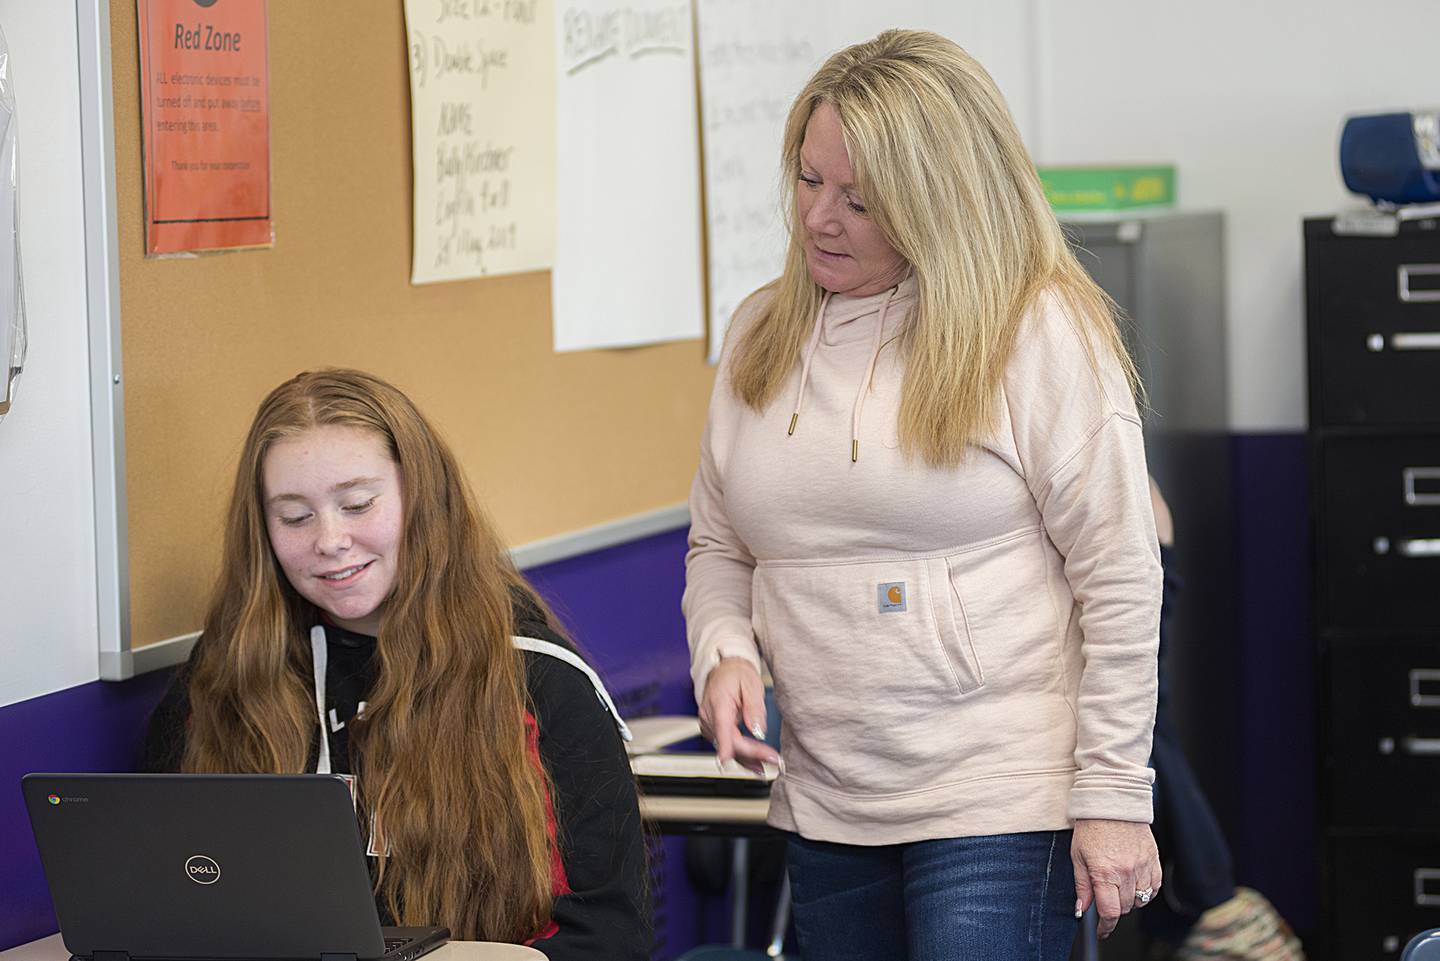 Dixon High School teacher Jenny Kirchner works on a project with student Autumn Sandusky Thursday, April 14, 2022. Kirchner has dedicated the past 32 years to educating the students of Dixon public schools. Her love of teaching stretches back even further.